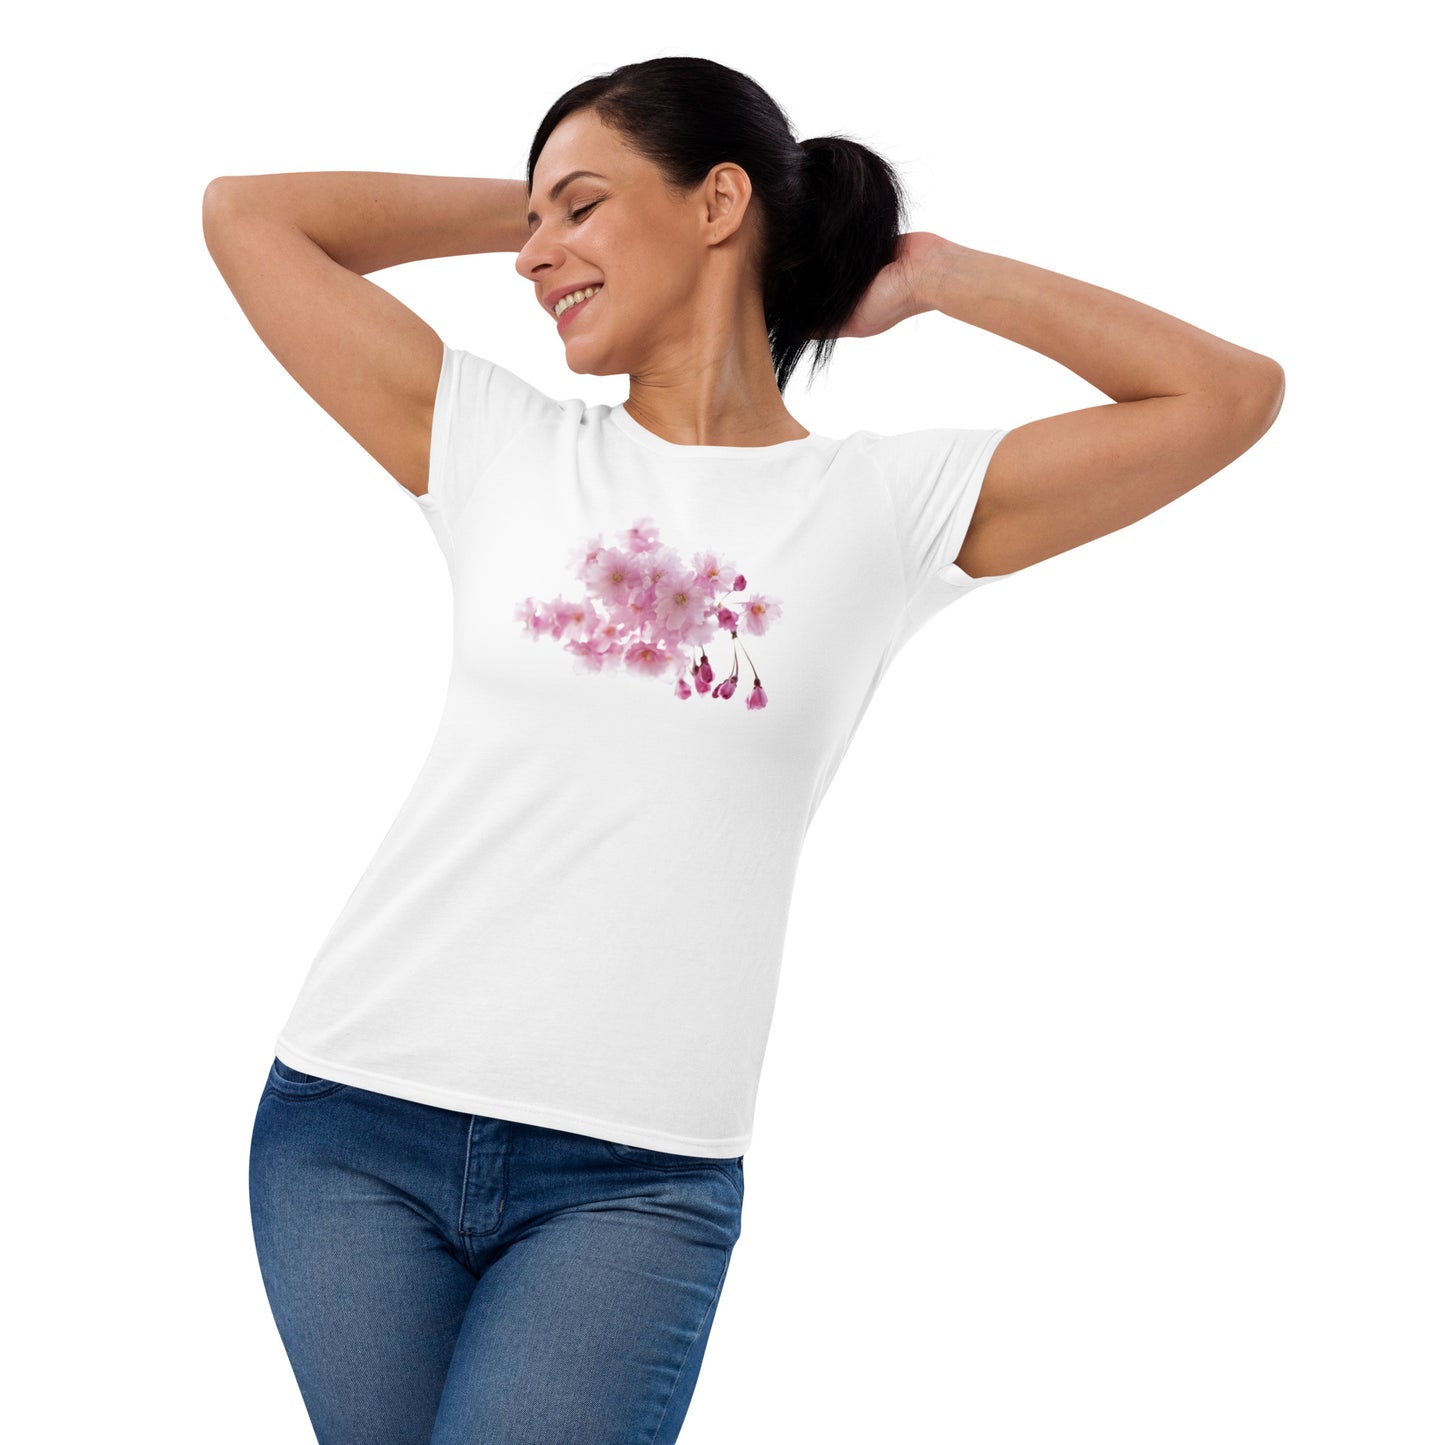 "Elegant Women's Short Sleeve T-Shirt with Cherry Blossoms - Supreme Comfort and Lasting Quality"